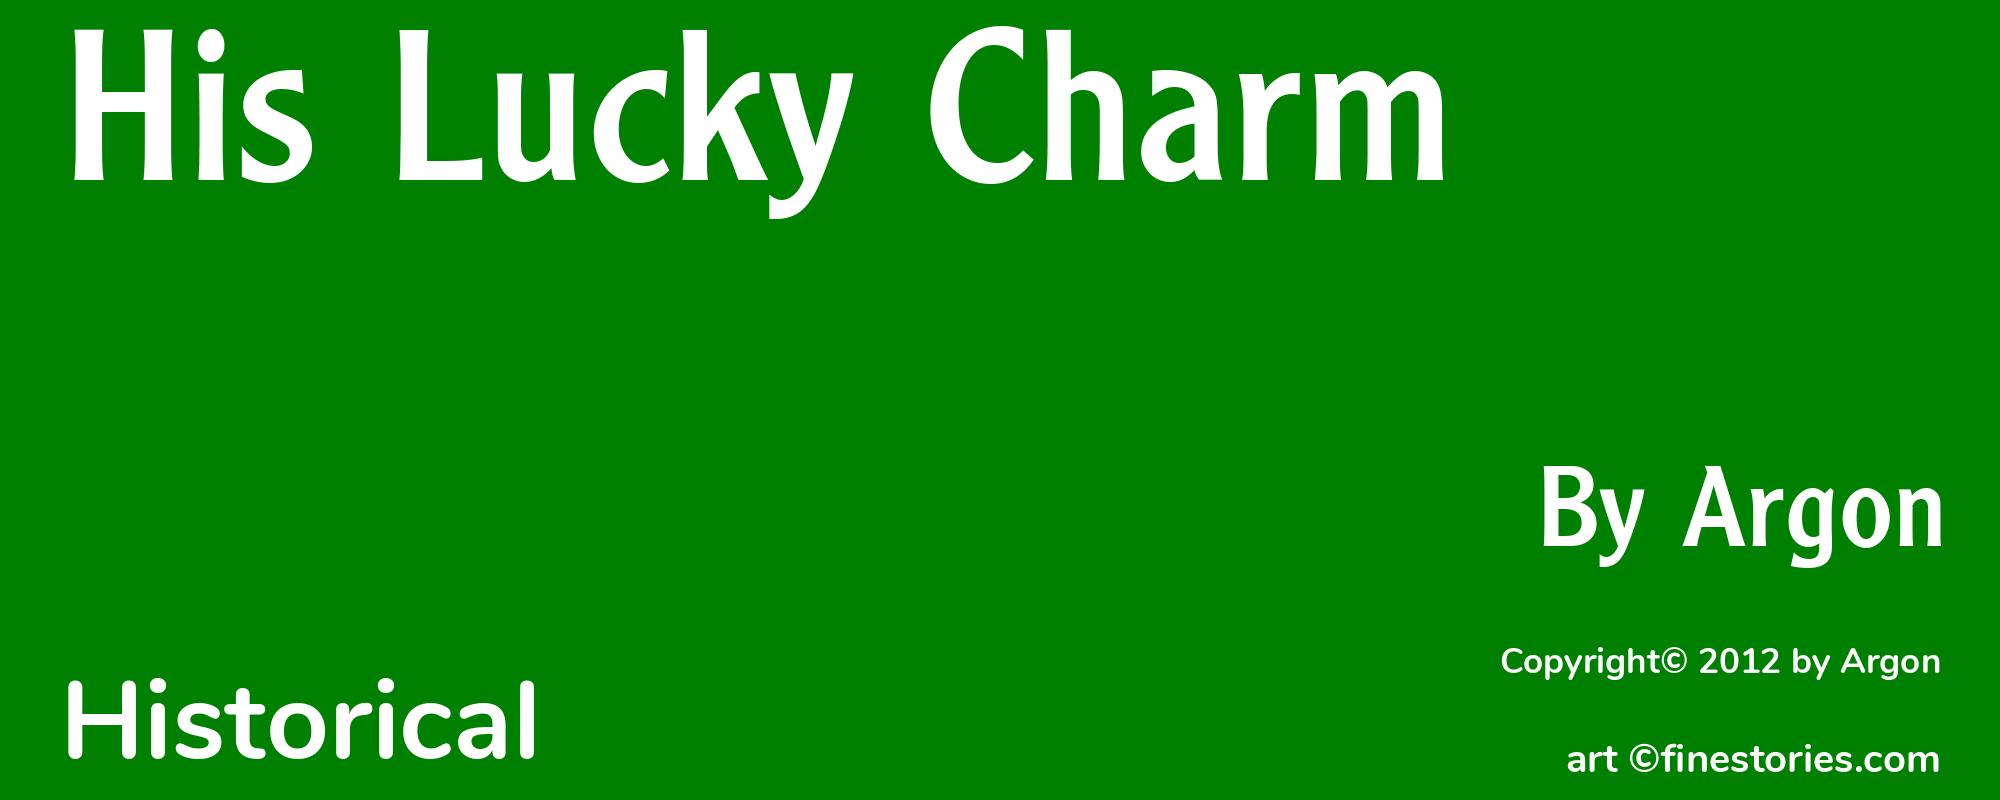 His Lucky Charm - Cover